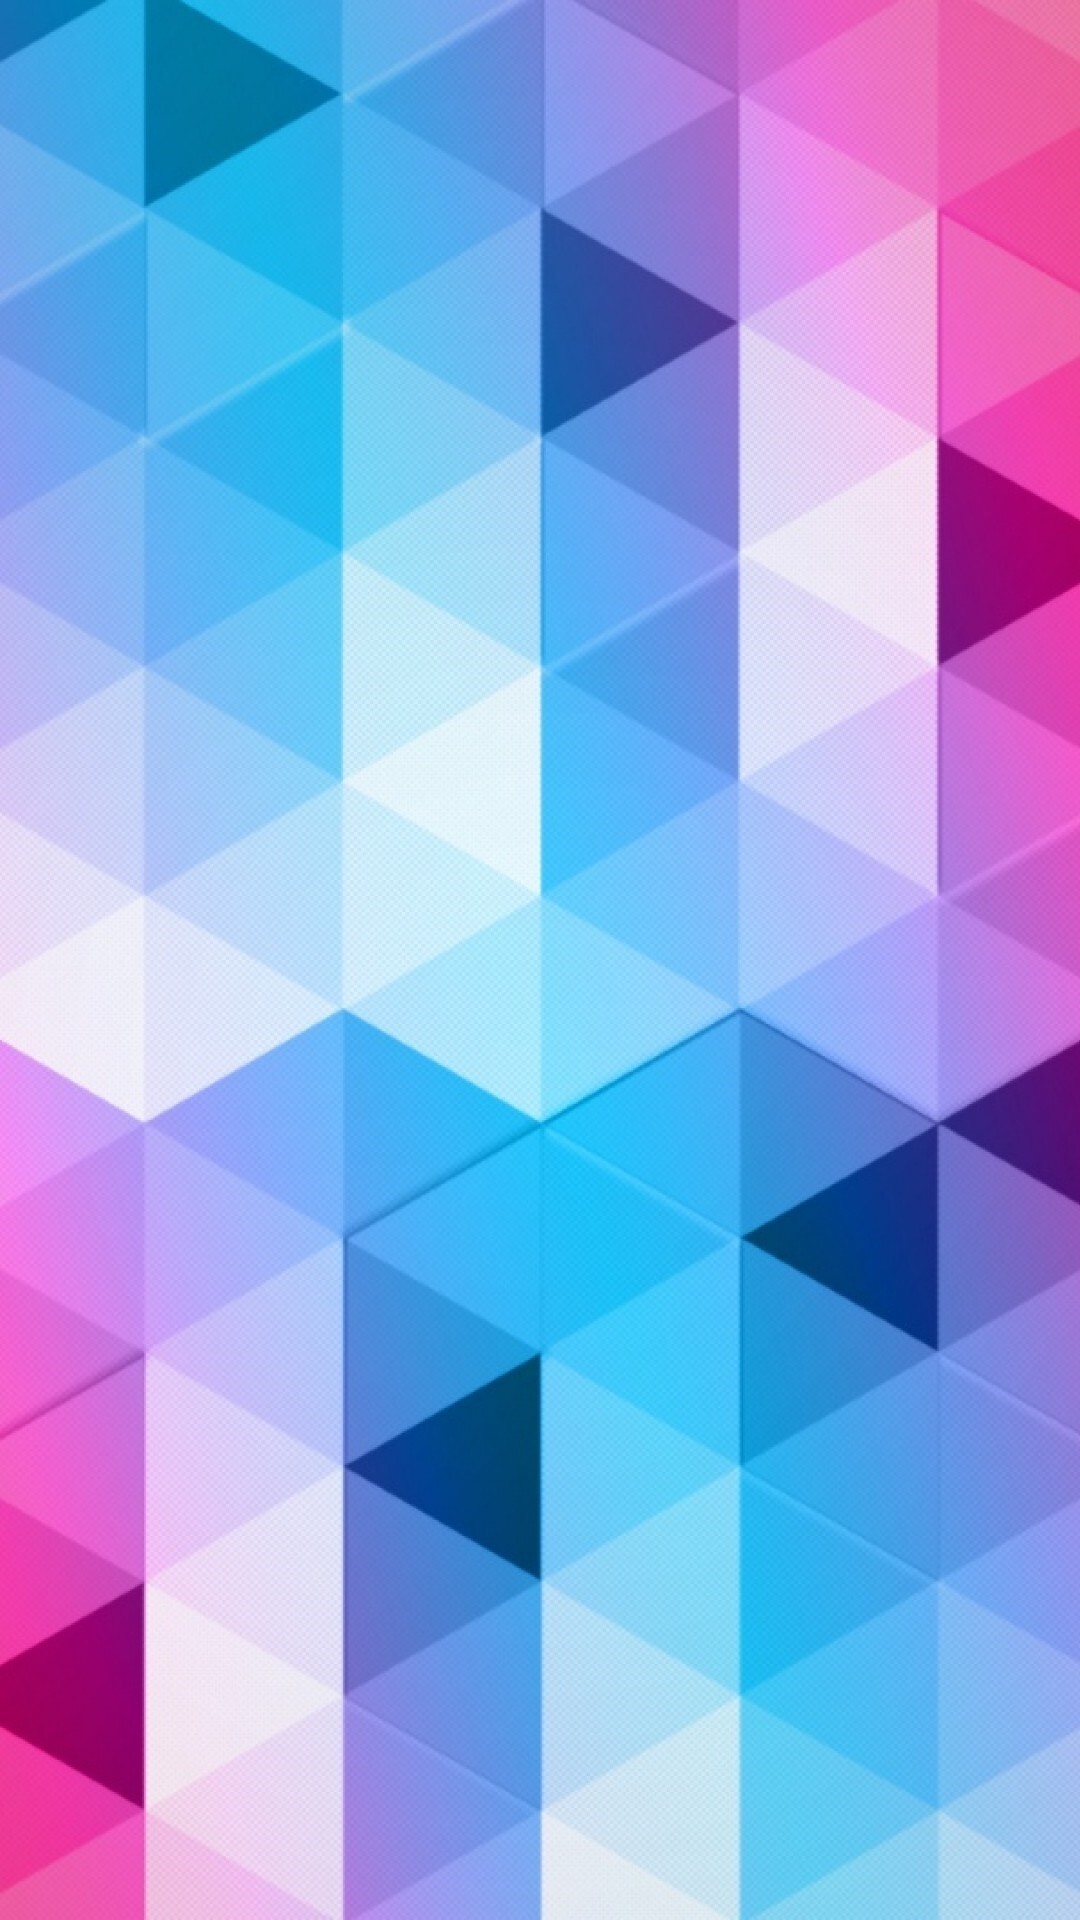 Geometry: Equilateral triangles, Simple polygons, Acute angles. 1080x1920 Full HD Wallpaper.